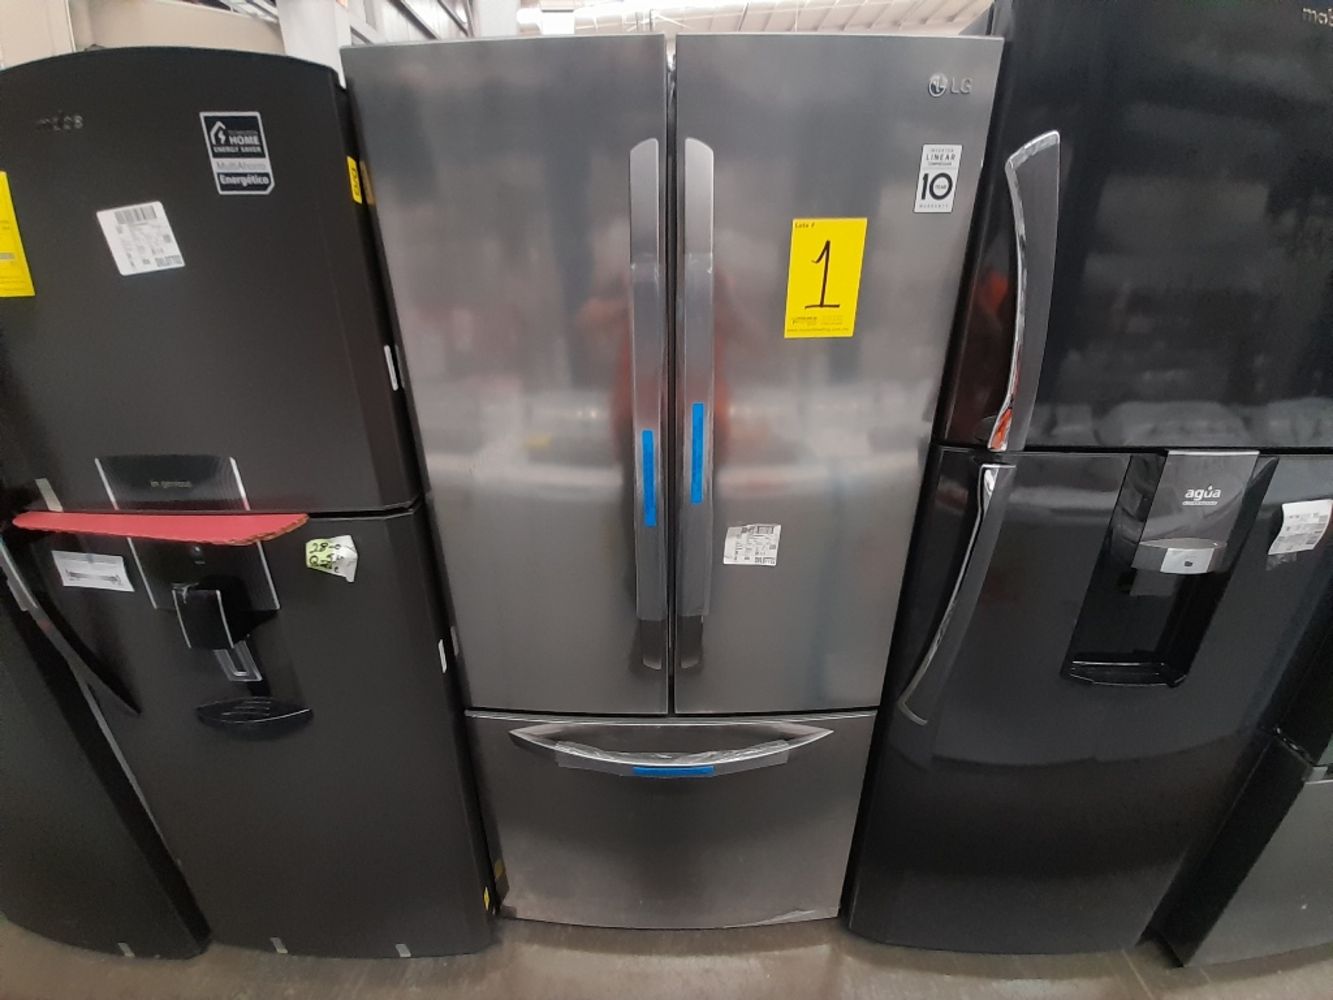 Live Auction of Return Equipment Refrigerators, Freezers, Cooktops, Ovens, Stovetops, Furniture, Mattresses, Washers & Dryers